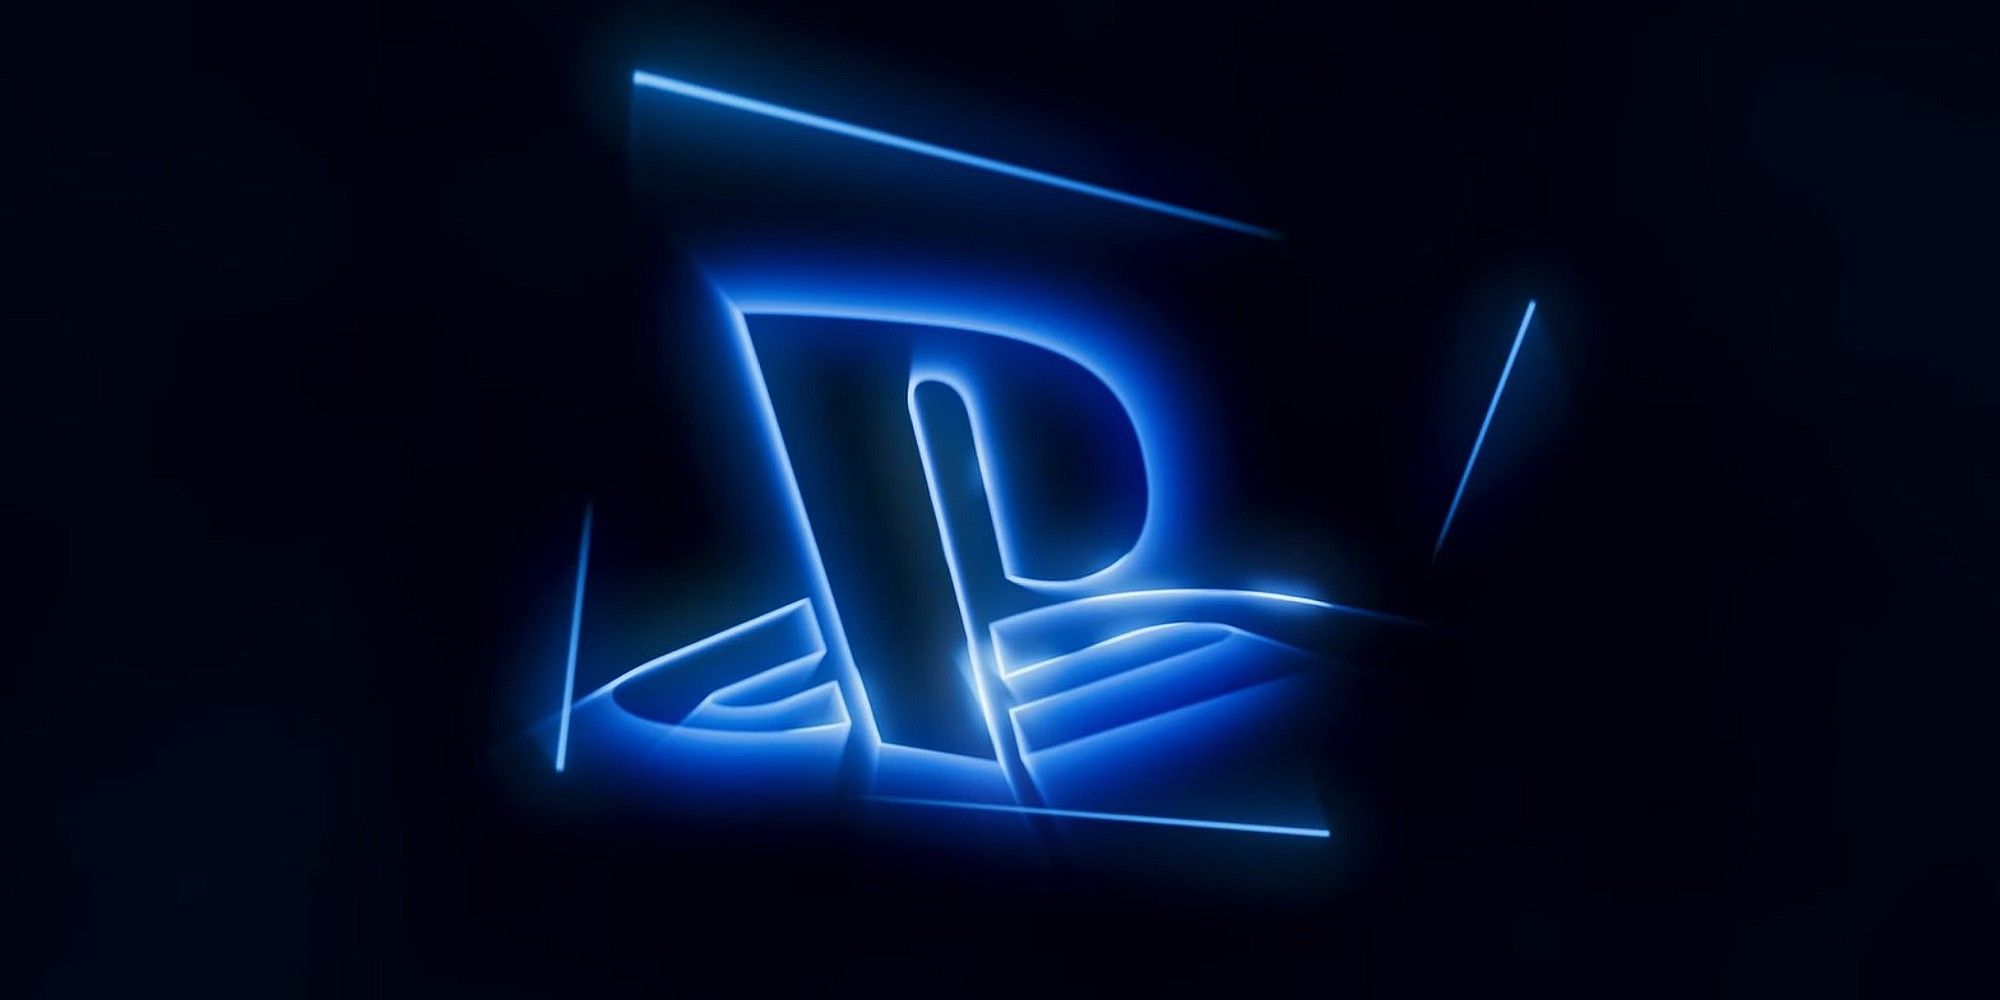 Sony is advertising a 'PC planning and strategy' senior director role